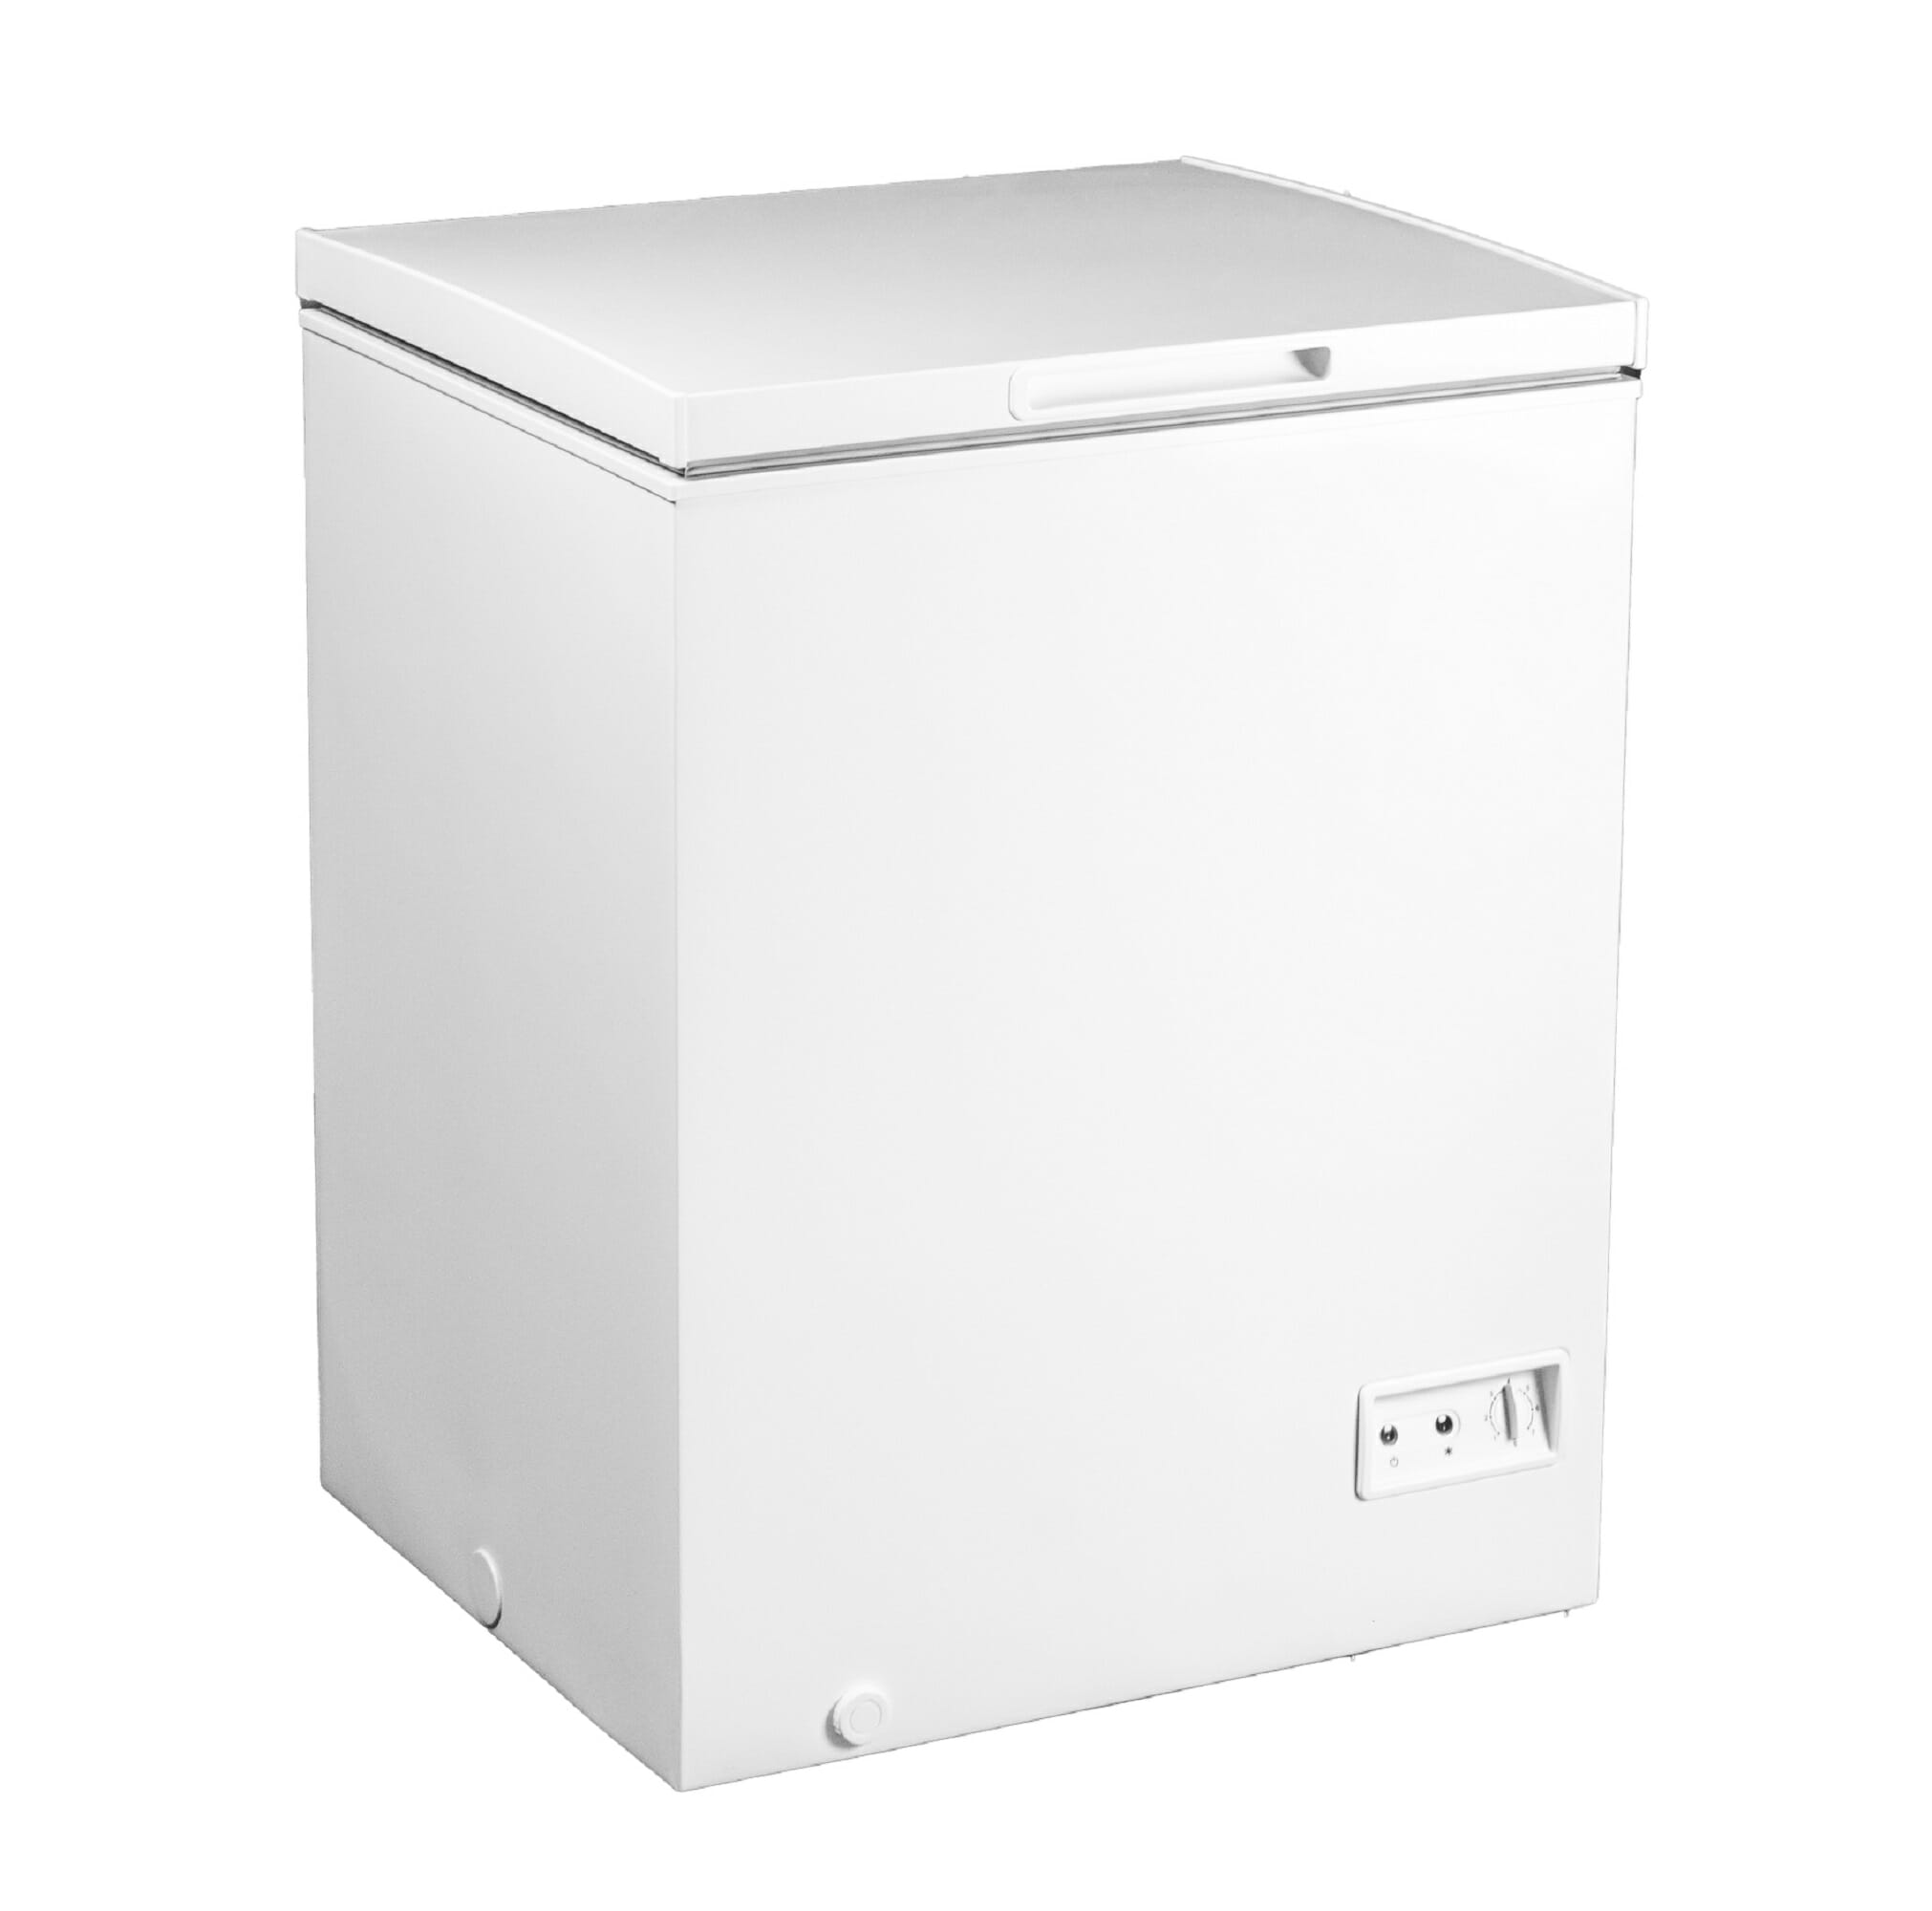 Danby - 5 cu. Ft  Chest Freezer in White - DCF050A5WDB